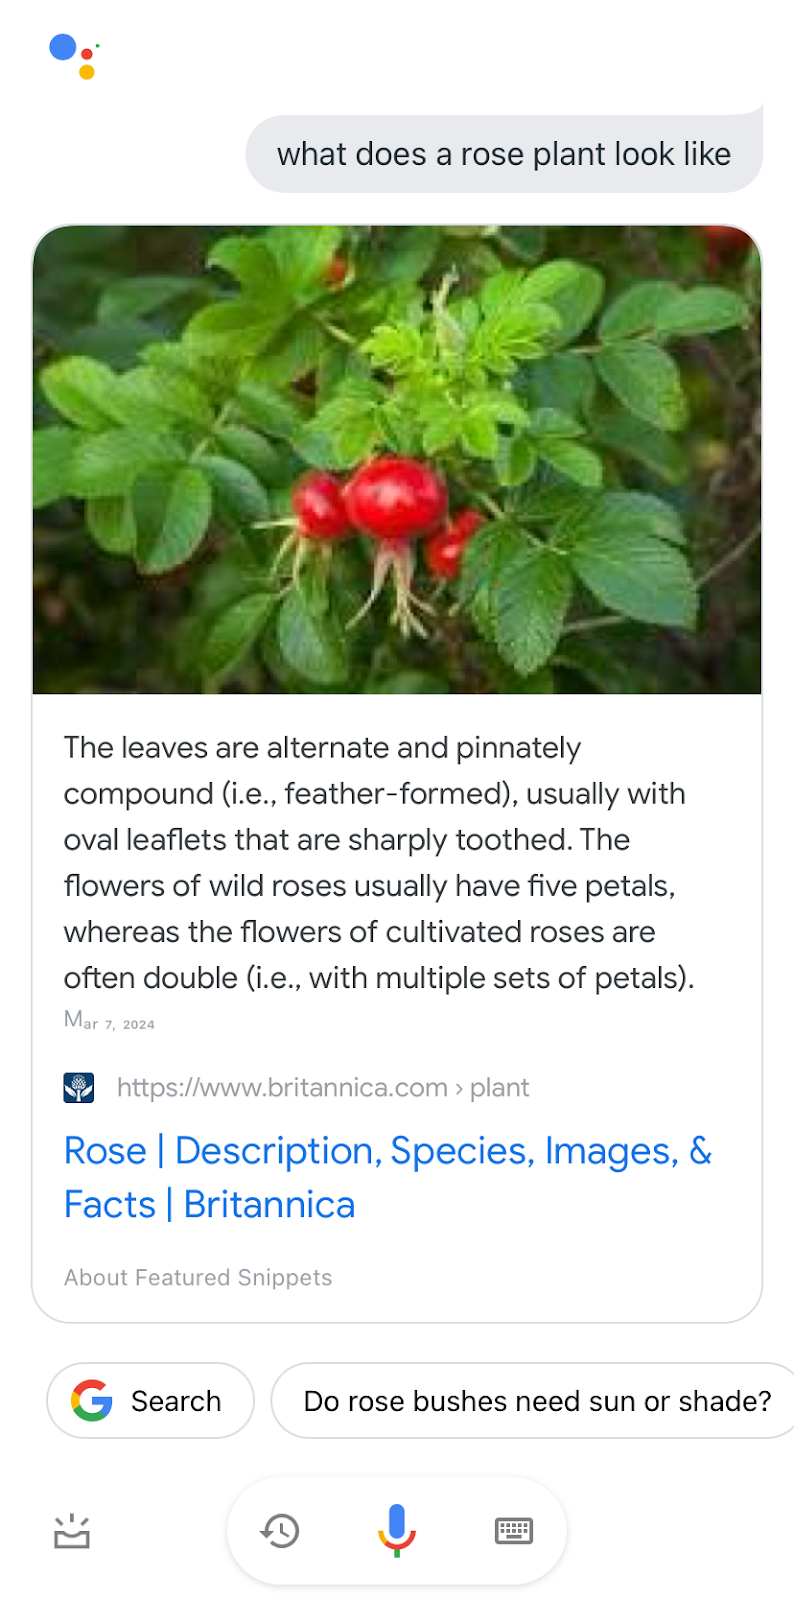 featured snippet with images in Google Assistant for "what does a rose plant look like"